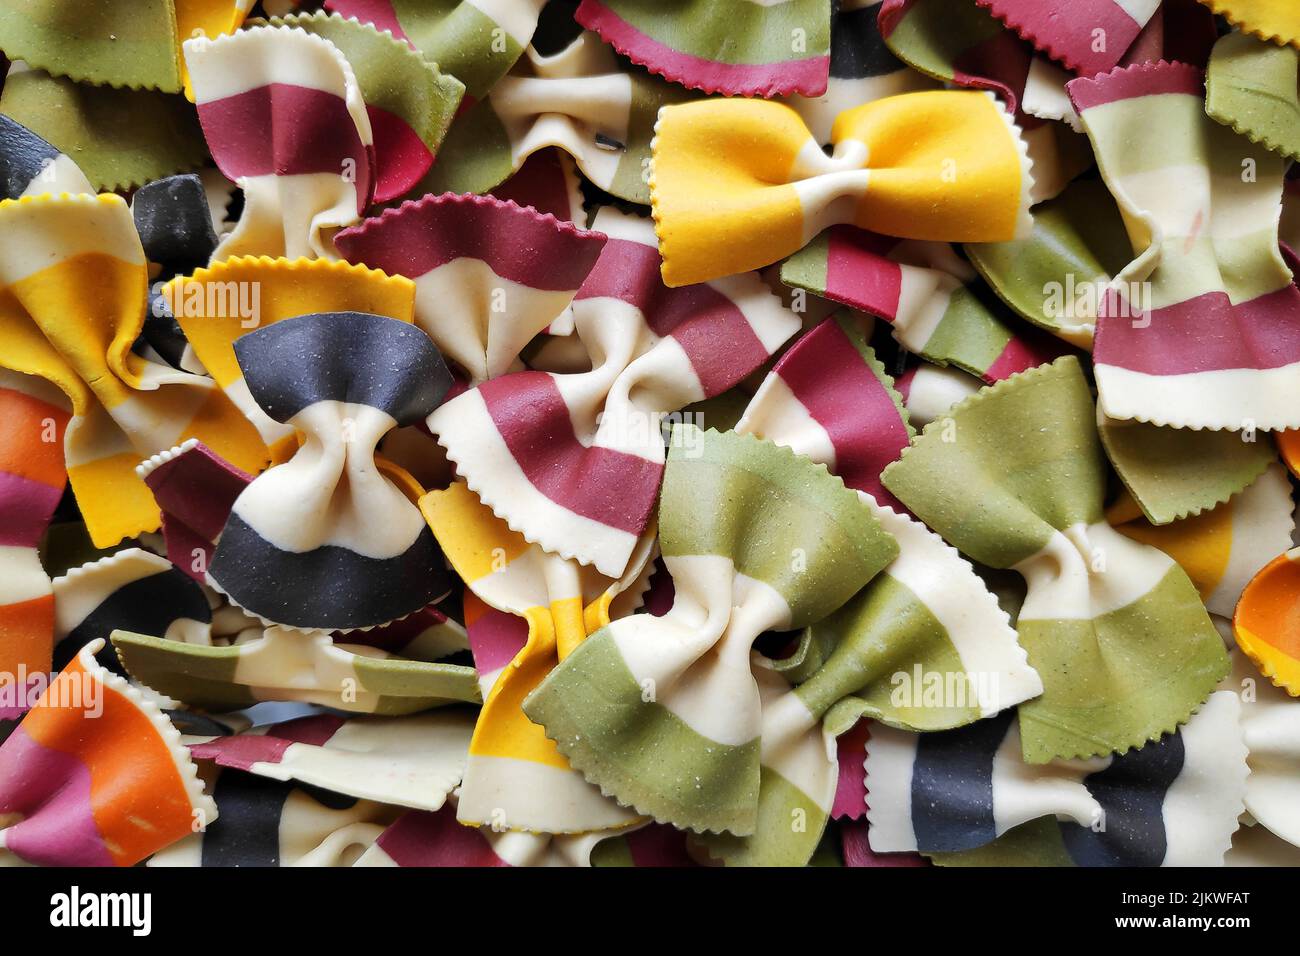 Close-up on a stack of uncooked multi colorful striped farfalles from Italy. Stock Photo